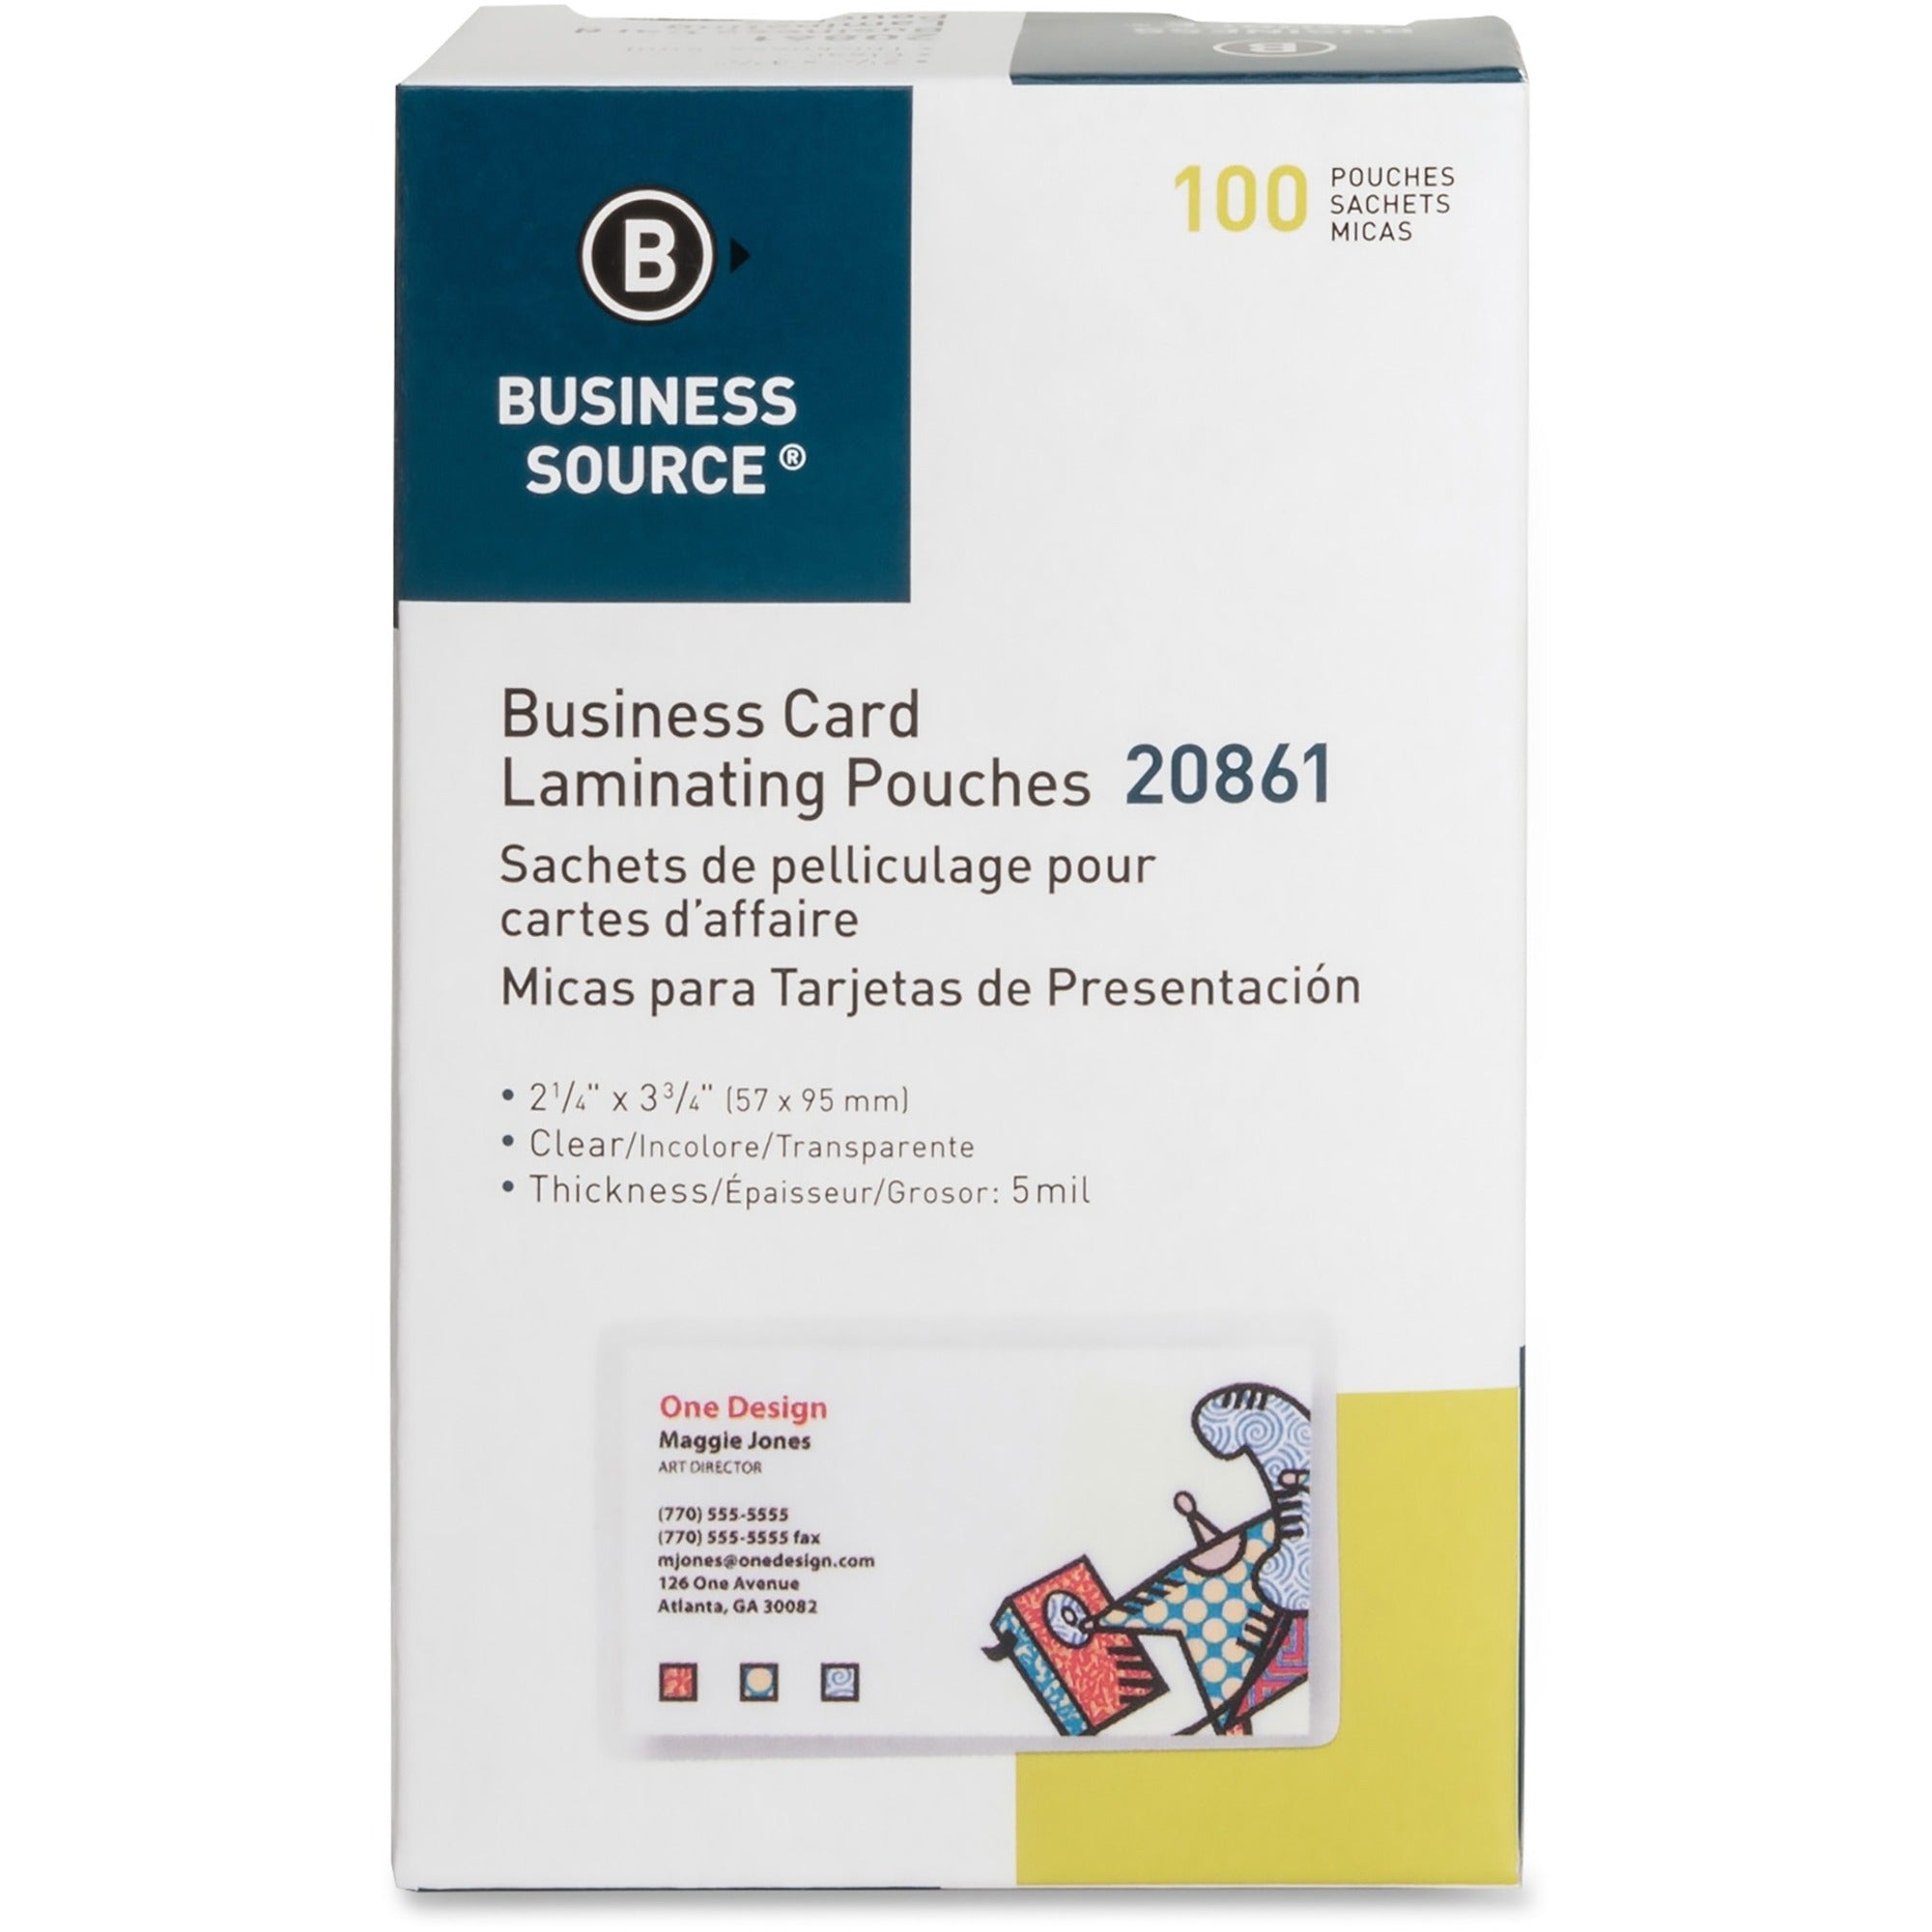 Business Source 5 mil Business Card Laminating Pouches - Laminating Pouch/Sheet Size: 2.25" Width x 3.75" Length x 5 mil Thickness - for Business Card - Pre-trimmed, Moisture Resistant, Fade Resistant - Clear - 100 / Box - 